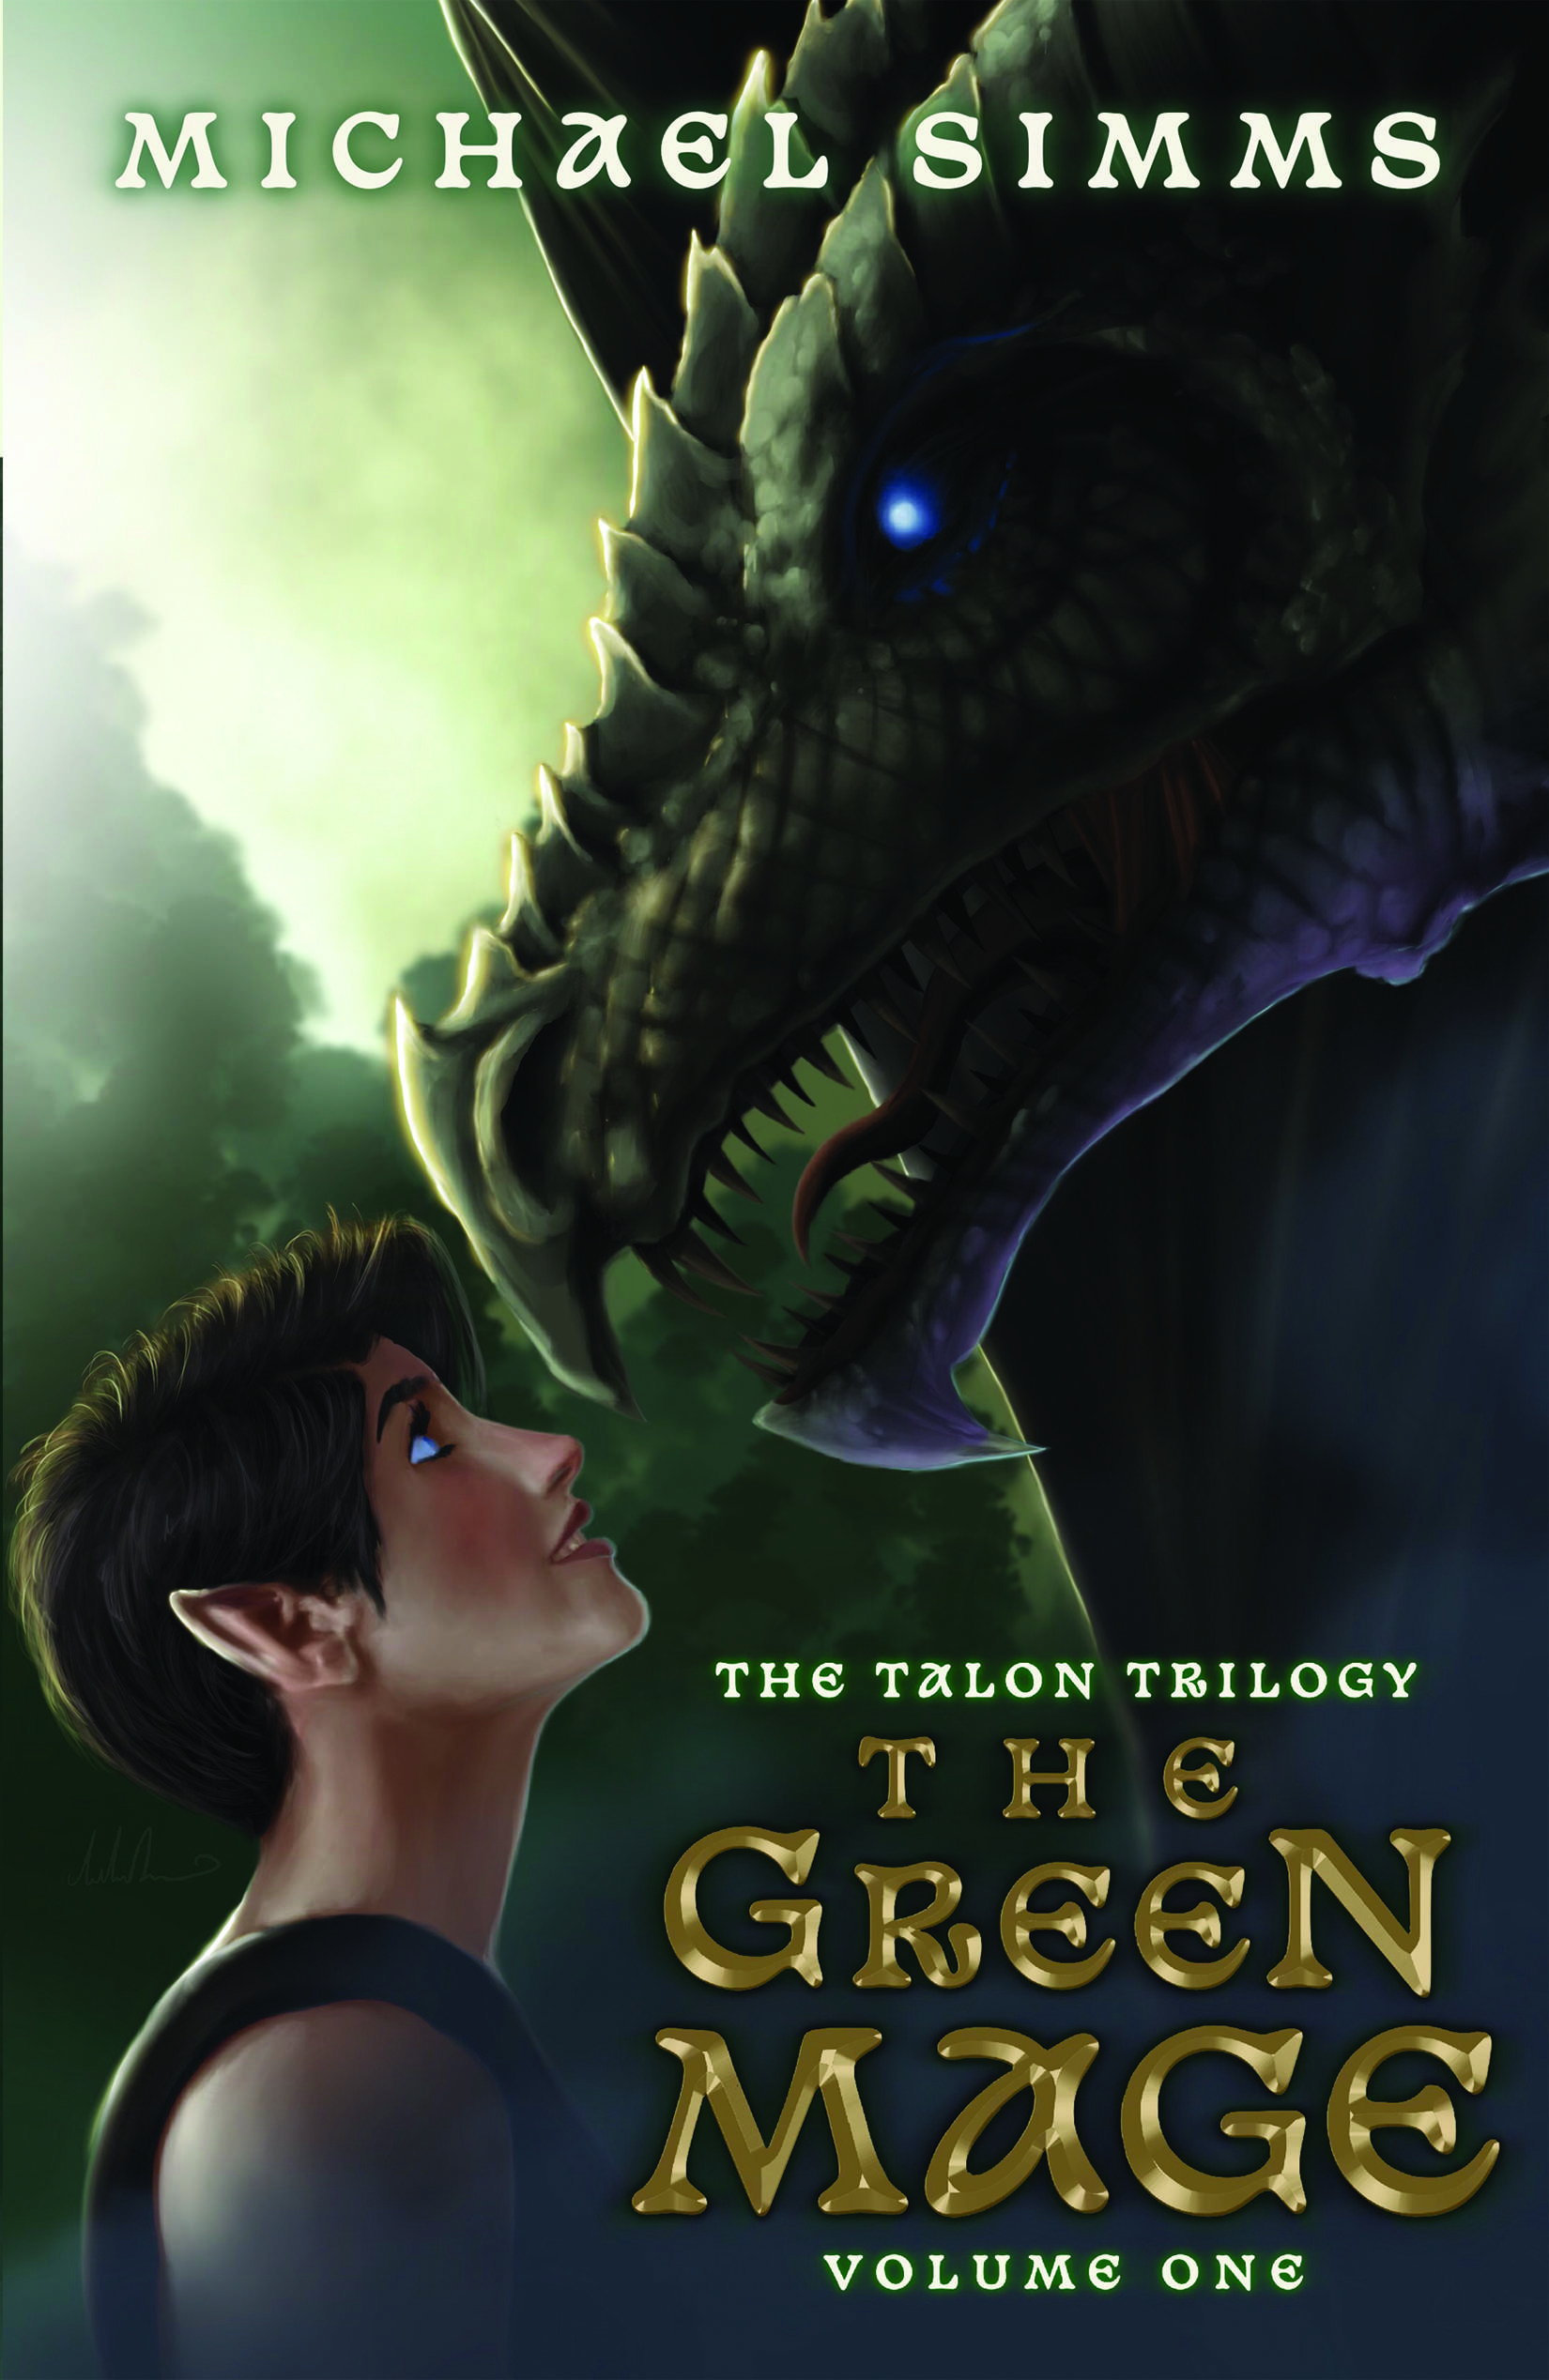 The Green Mage first book in the Talon Trilogy by Michael Simms with cover art by Andrew Dunn. Cover shows a young woman with short hair going nose to nose with a fierce-looking dragon. 